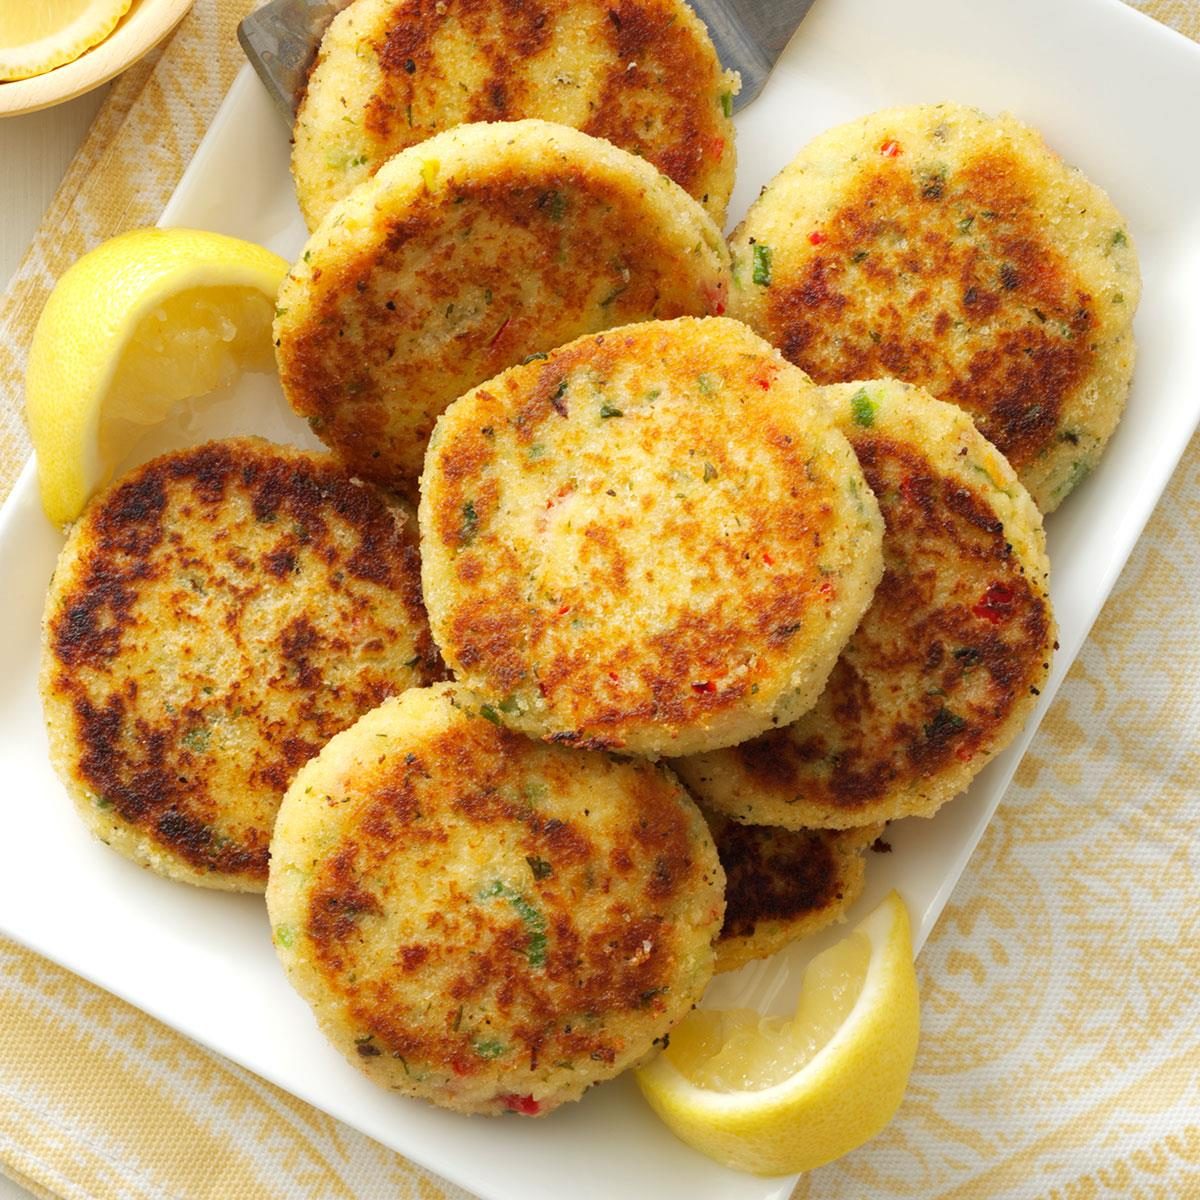 Inspired by: Maggiano's Jumbo Lump Crab Cakes